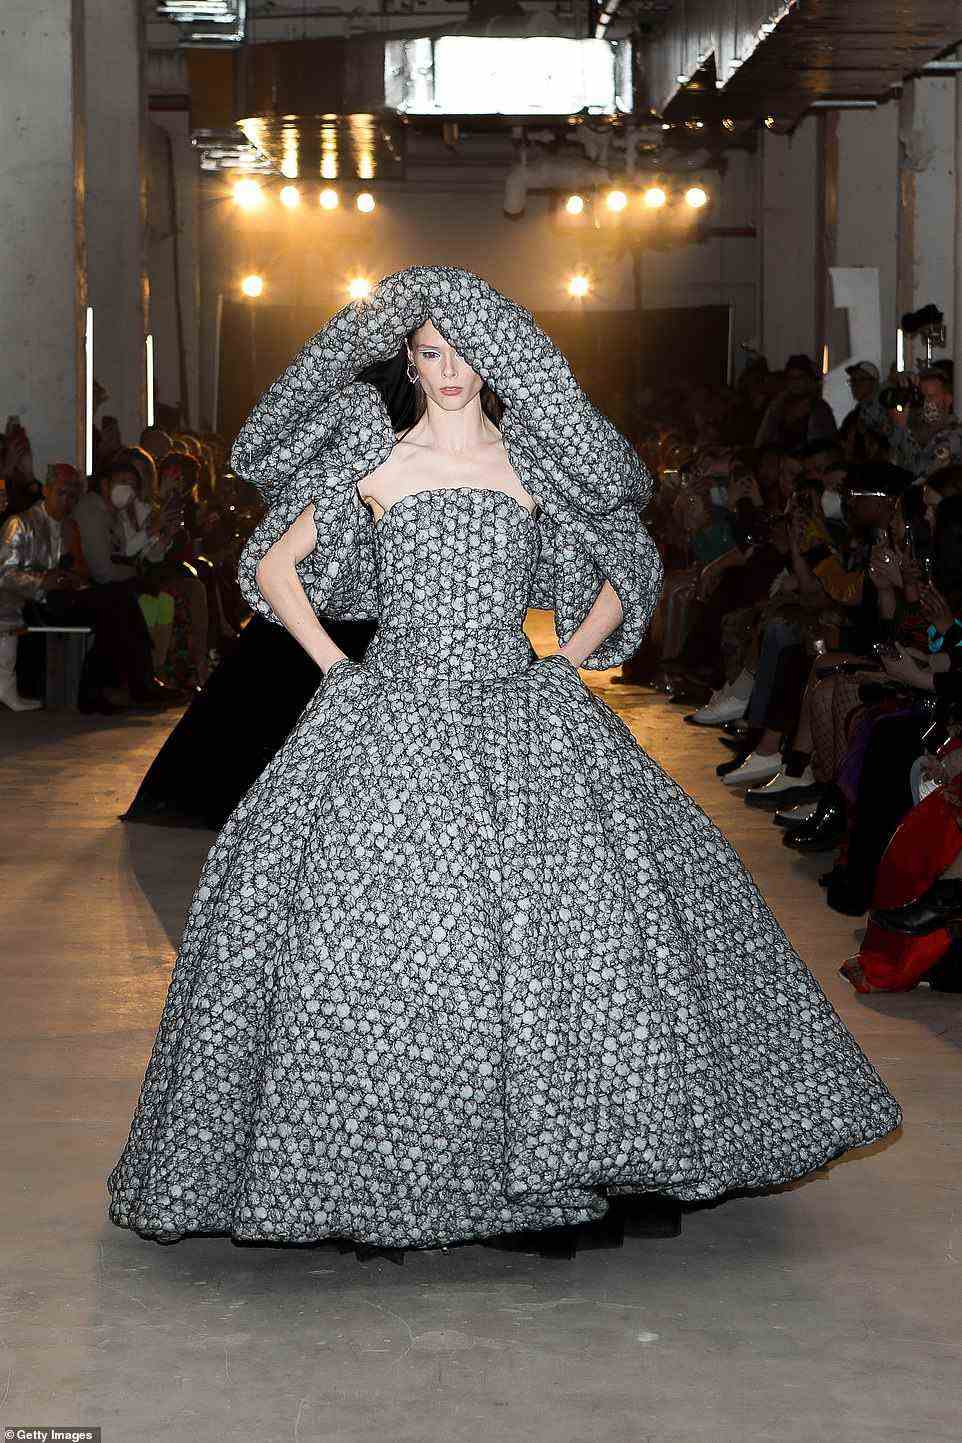 Coco on the runway: Canadian runway sensation Coco Rocha, 33, made a splash on the runway in a stunning grey gown